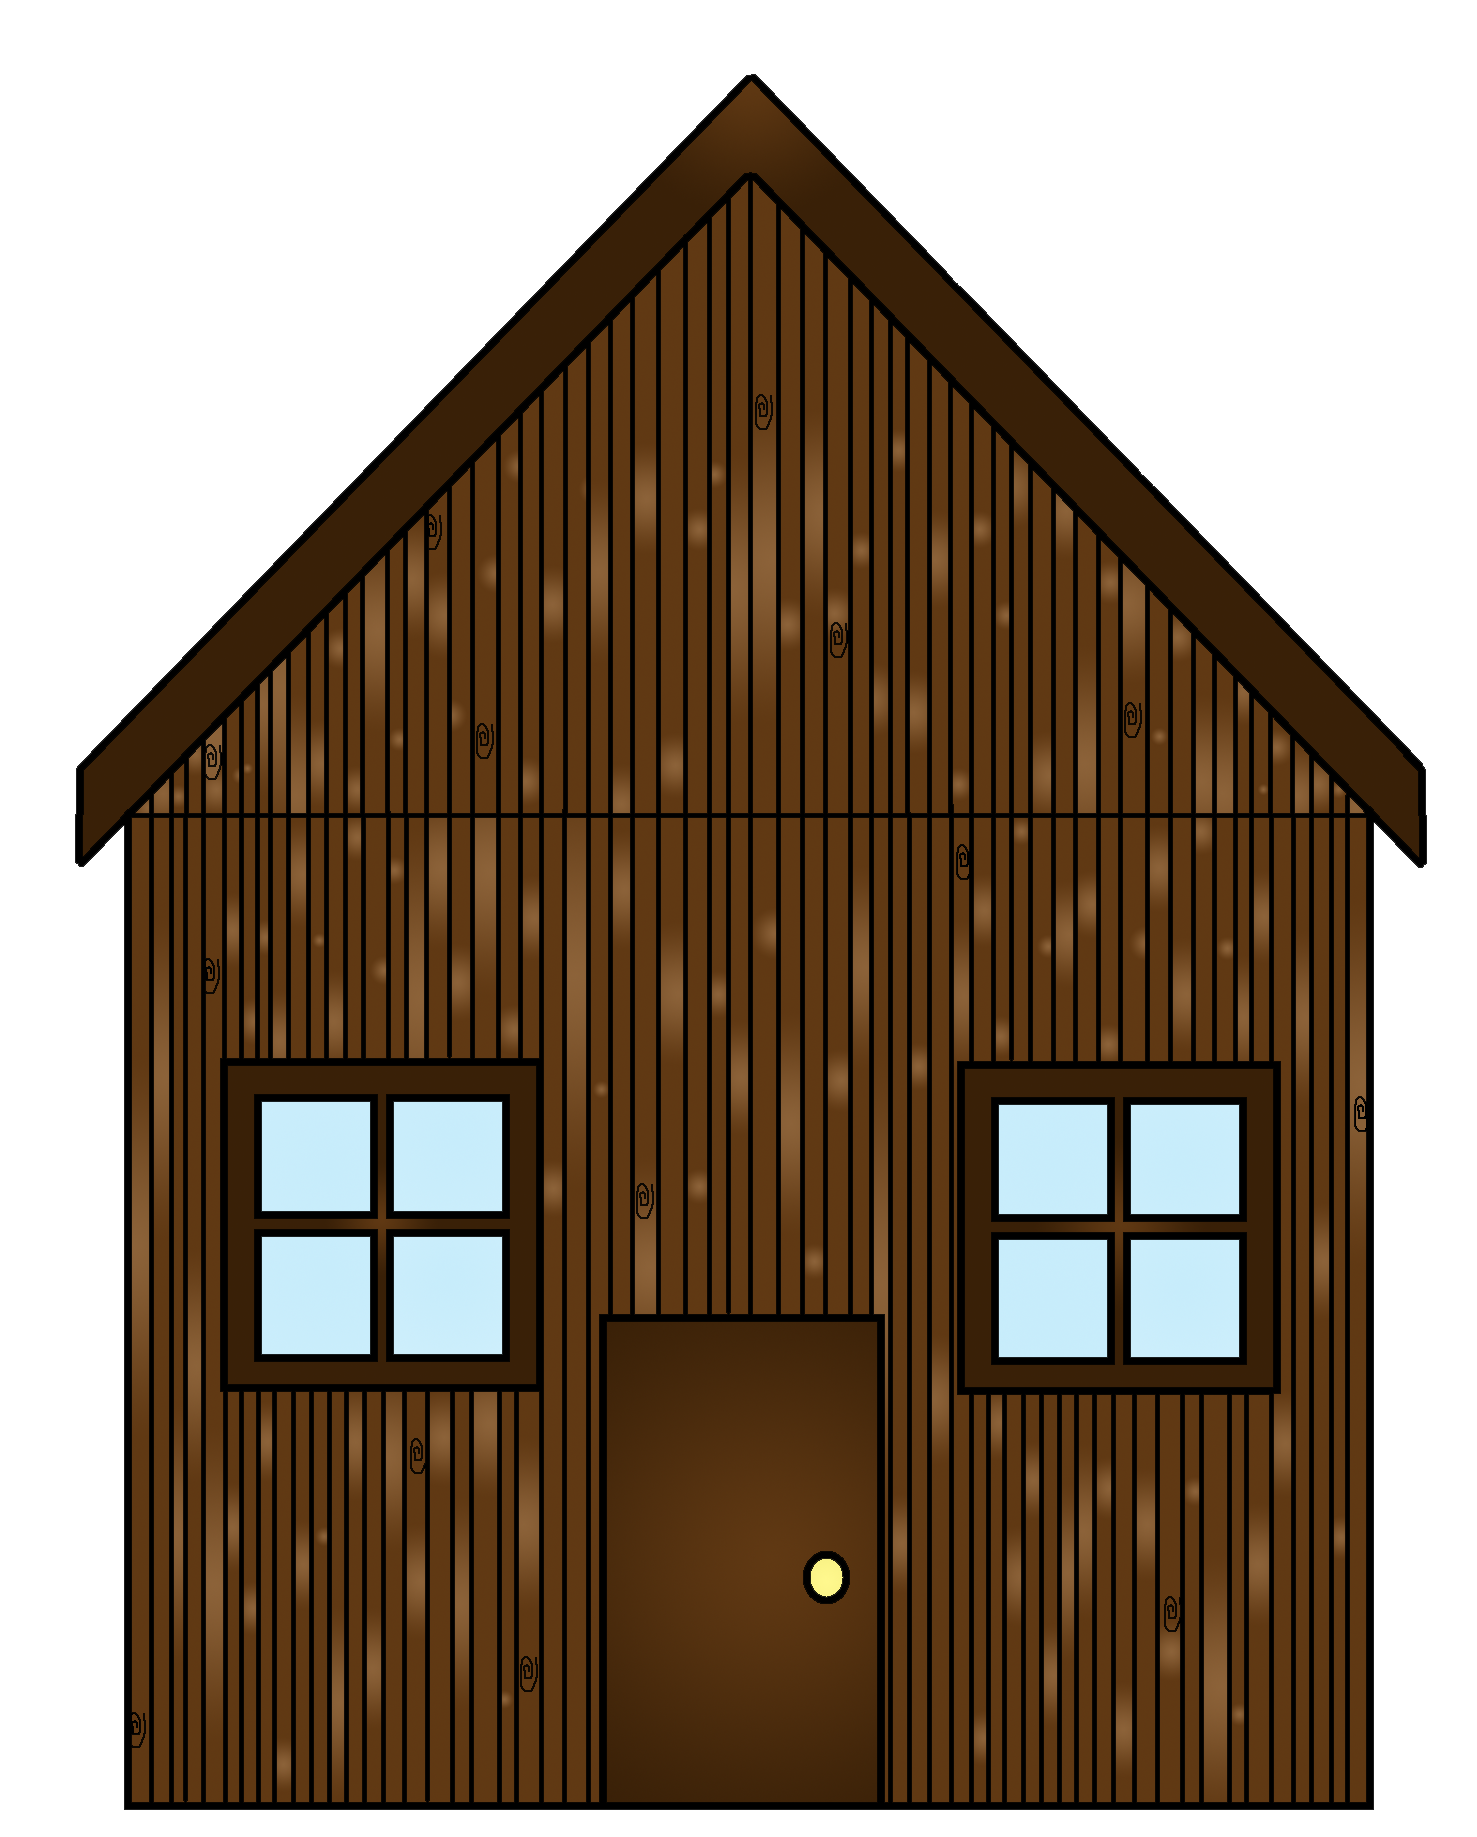 Houses clipart three little pig. Graphics by ruth pigs